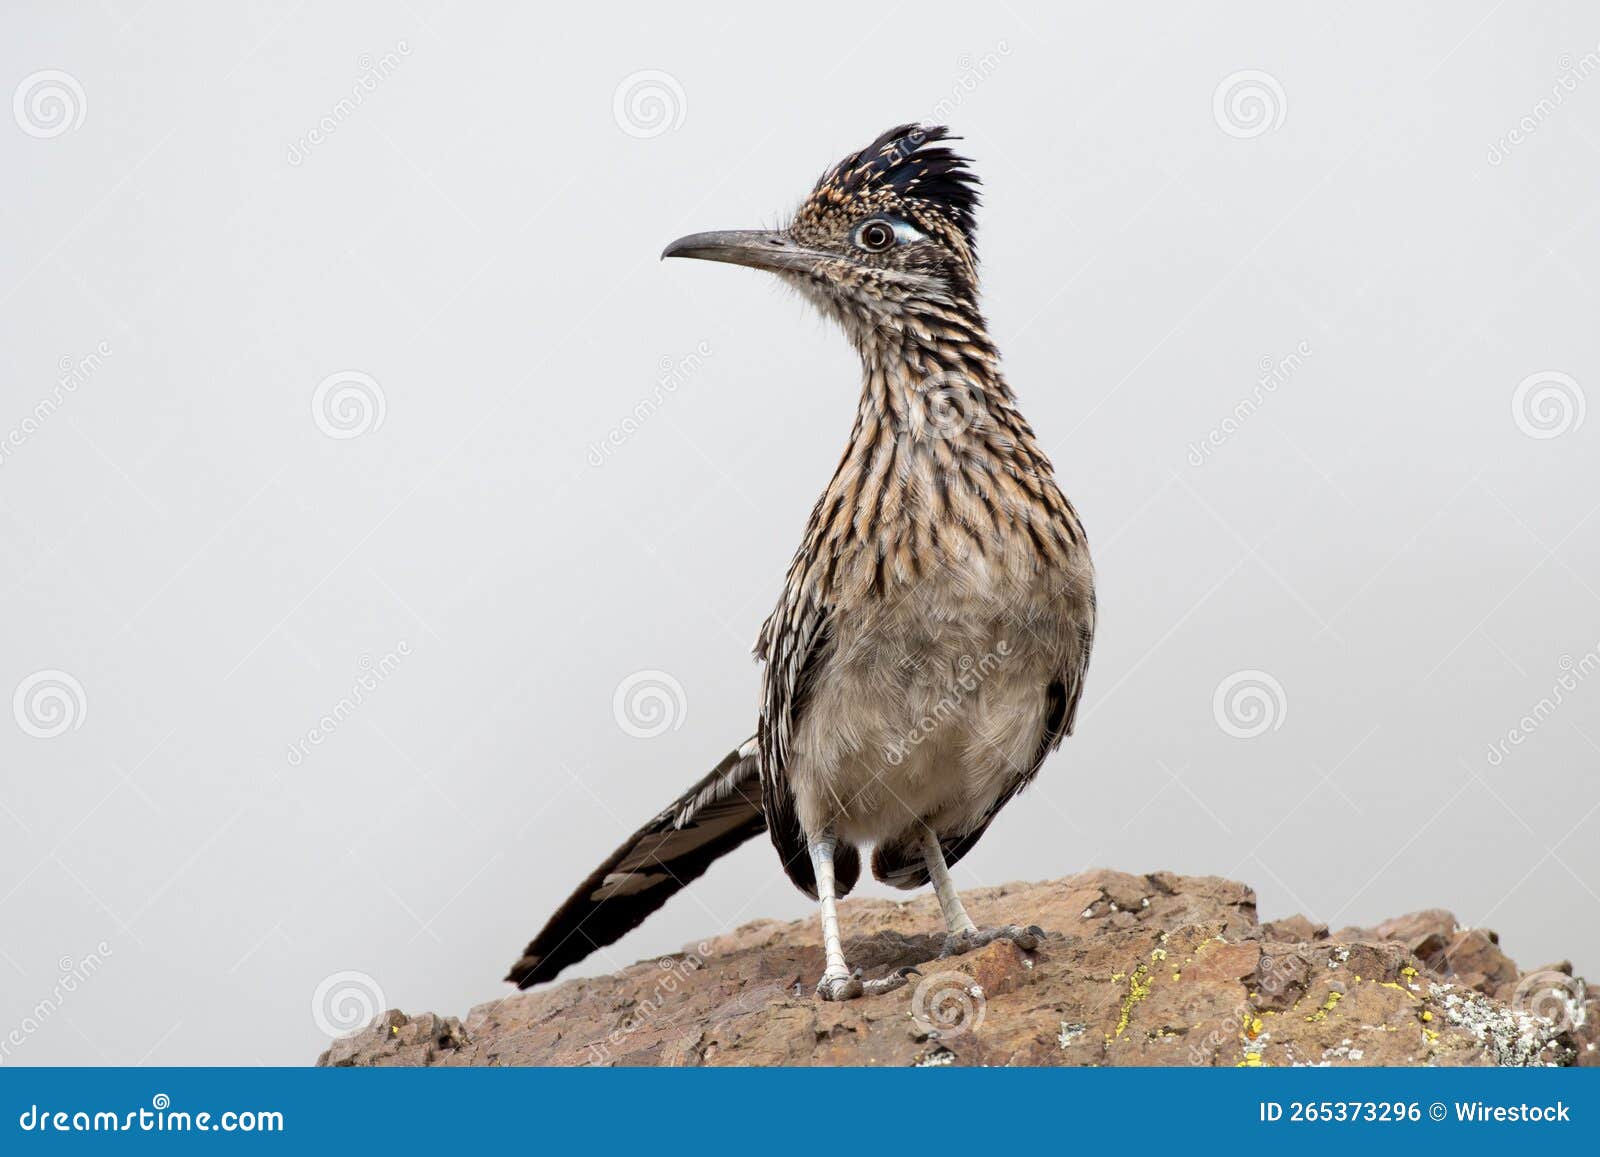 close-up shot of a greater roadrunner standing on a stone